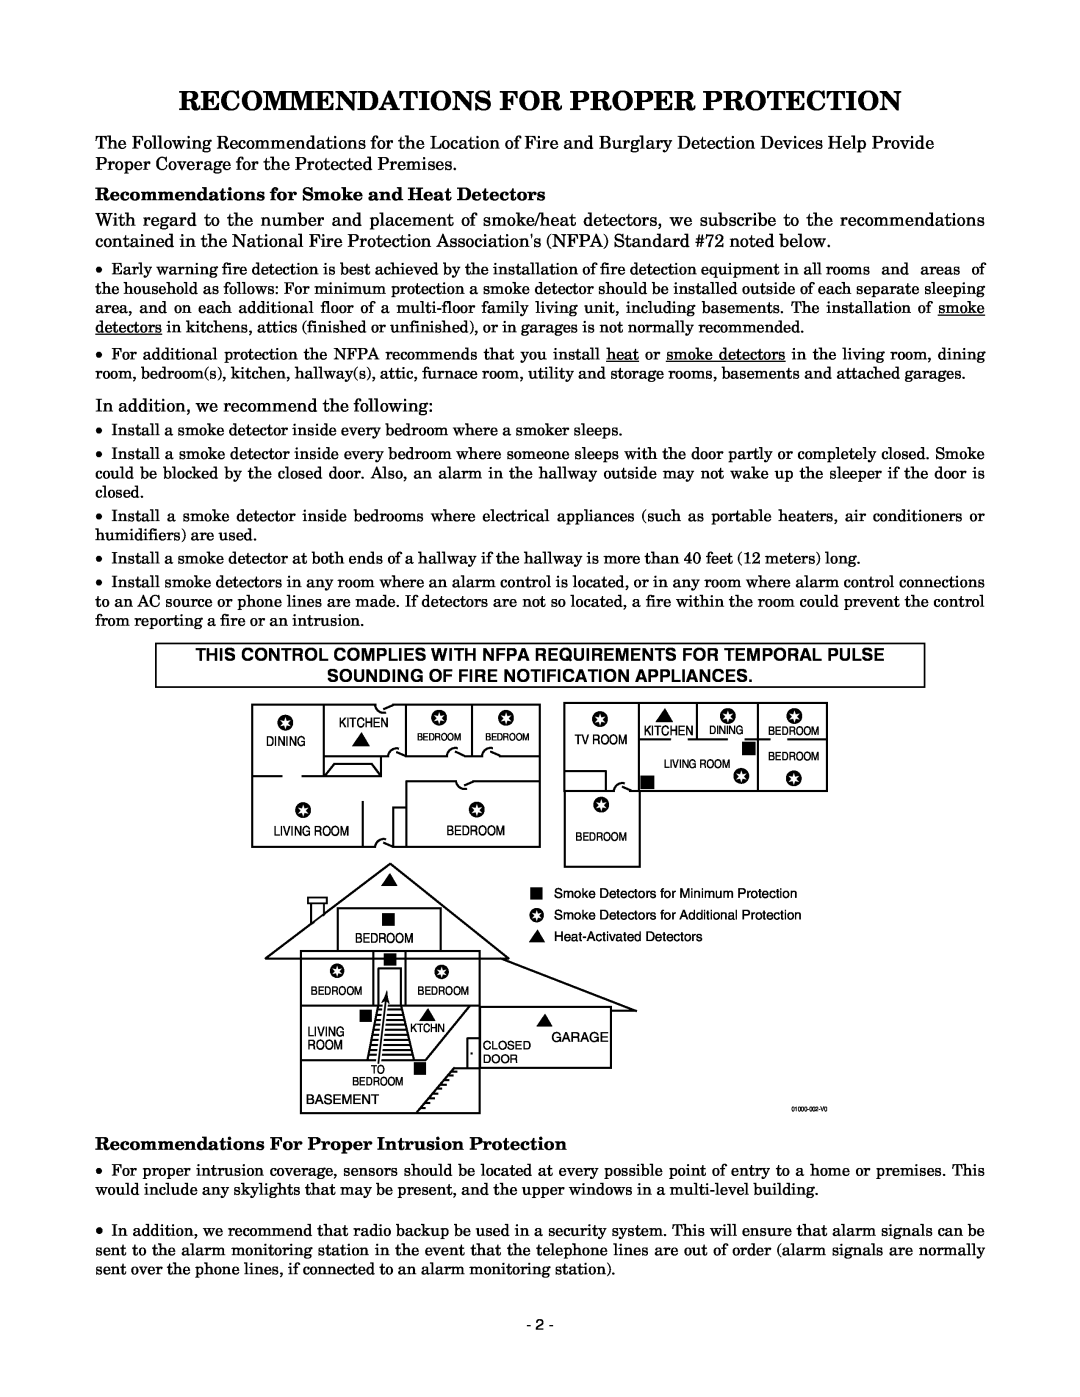 Honeywell K14114 3/06 Rev.B Recommendations for Smoke and Heat Detectors, Sounding Of Fire Notification Appliances 